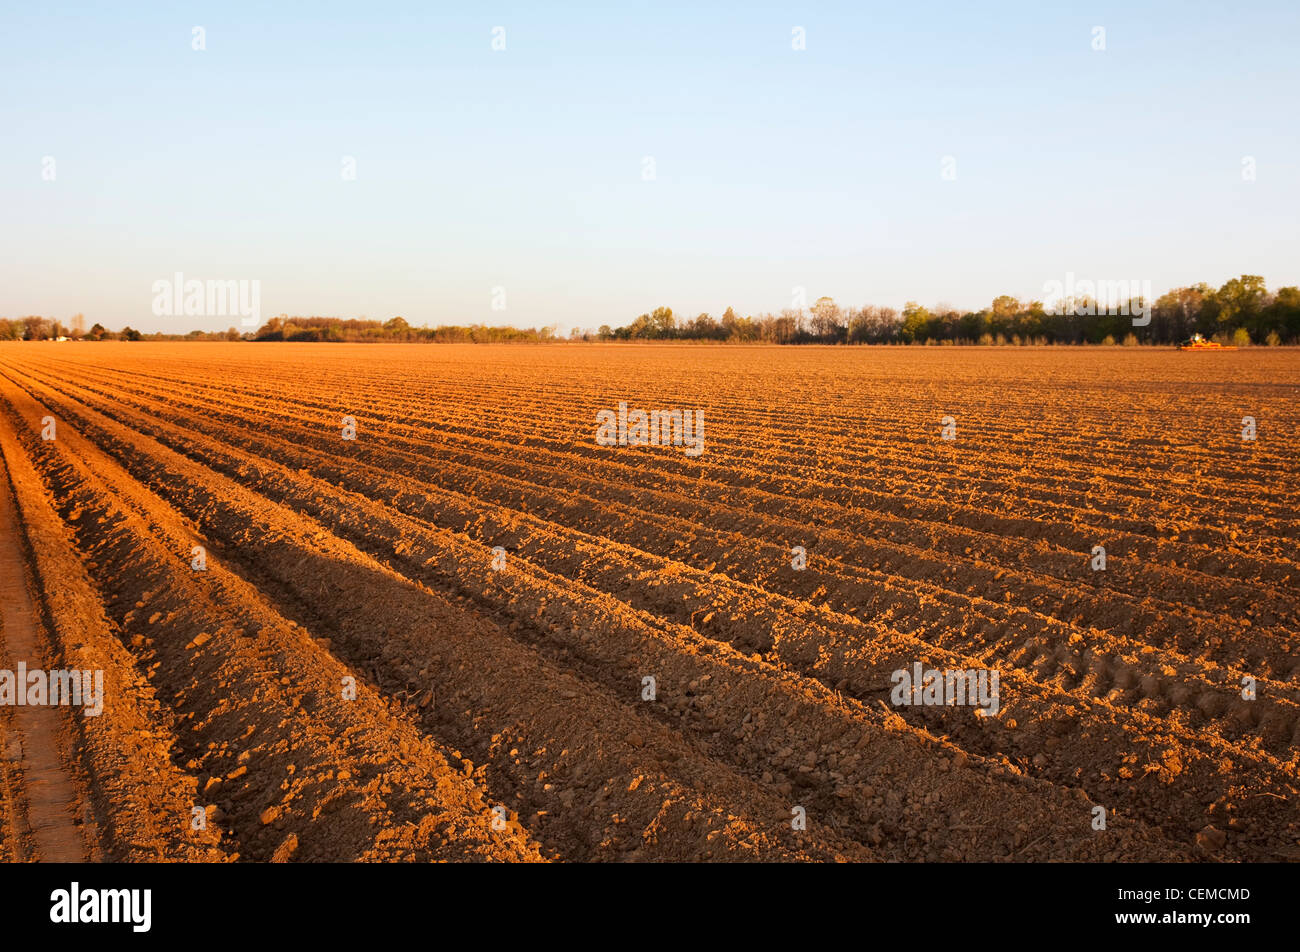 Agriculture - A field of bedded soil that has just been planted to grain corn in late afternoon light / England, Arkansas, USA. Stock Photo